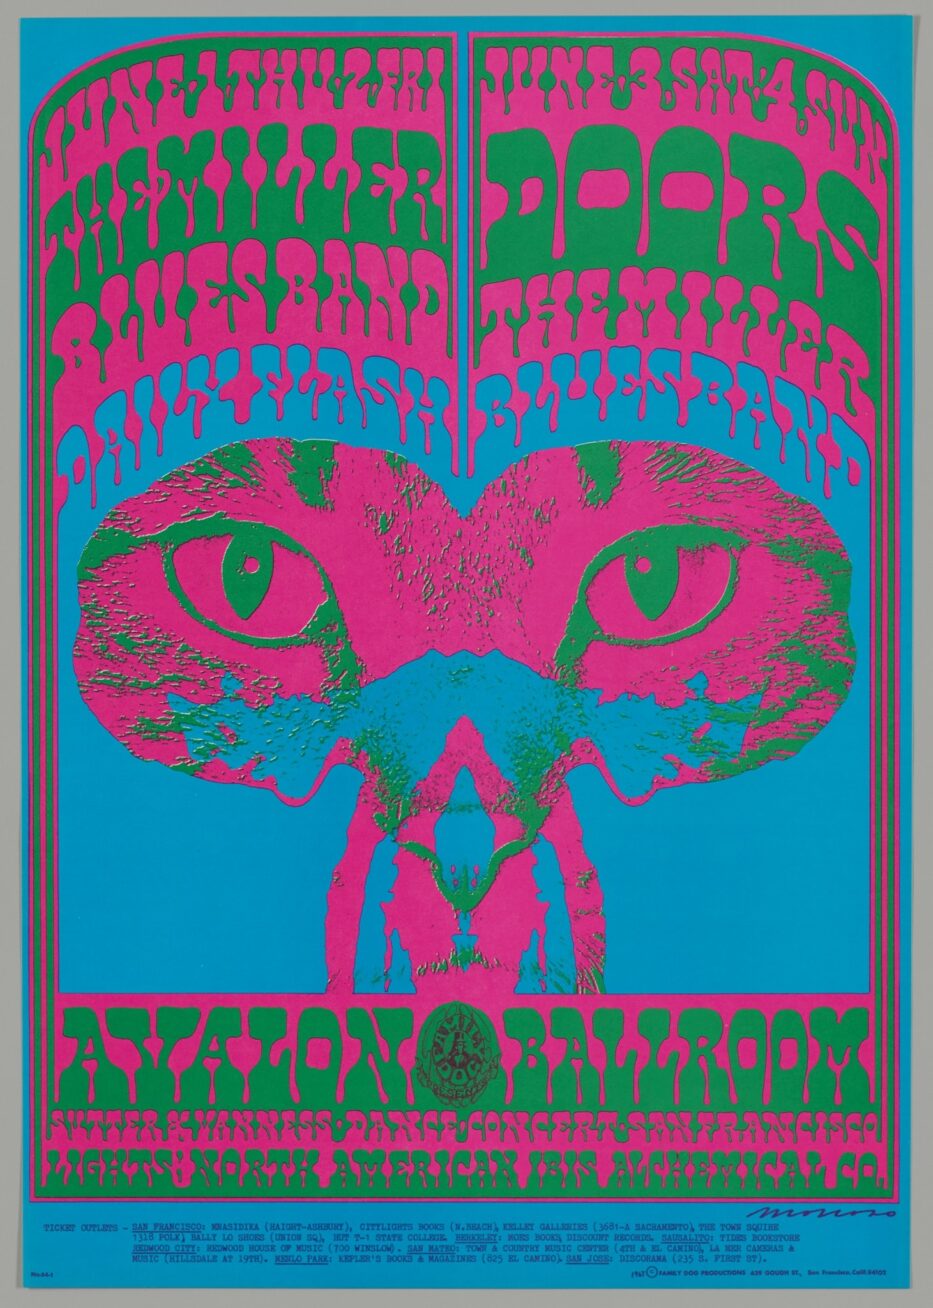 Pink Panther, Victor Moscoso, 1967, color offset lithograph on paper, image/sheet: 22 in x 14 inches. A blue, bright pink and green vertical poster depicting a cat’s eyes and nose in green over a mirror image of two heads with bright pink hair, all against a blue ground. Above the image, the space is divided in half with the left side reading: “June, 1, Thu, 2 Fri, The Miller Blues Band, Daily Flash” in green and blue on pink and the right side reading “June 3, Sat, 4 Sun, Doors, The Miller Blues Band” in green and blue on pink in psychedelic font. Across the bottom of the poster are the words: “Avalon Ballroom, Sutter & Van Ness, Dance Concert, San Francisco, Lights, North American Ibis Alchemical Co.” Additional ticket information appears across the bottom in plain, black font.